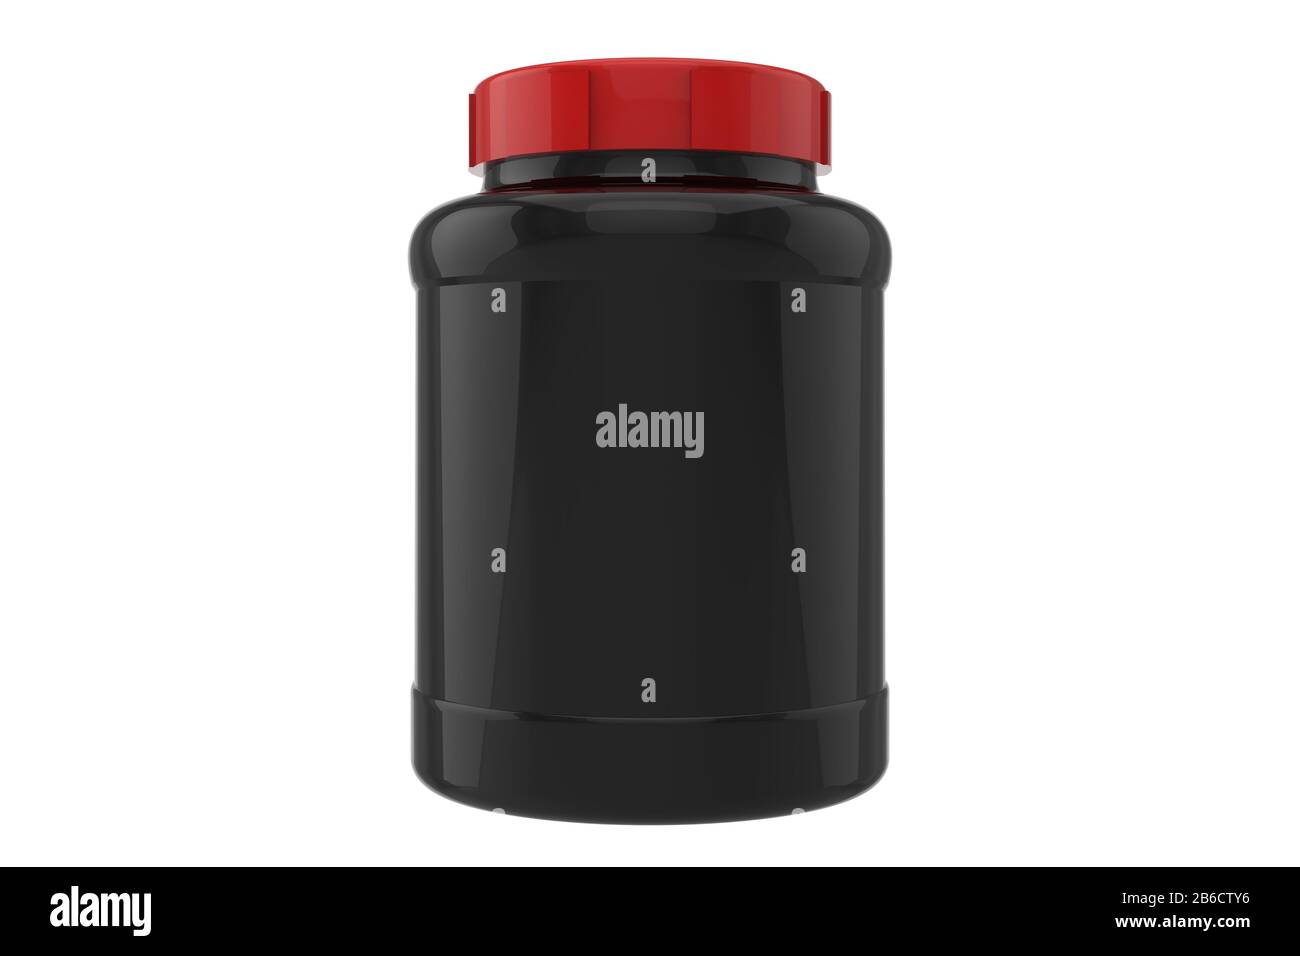 https://c8.alamy.com/comp/2B6CTY6/3d-supplement-jar-mockup-on-white-background-black-jar-with-red-cap-2B6CTY6.jpg